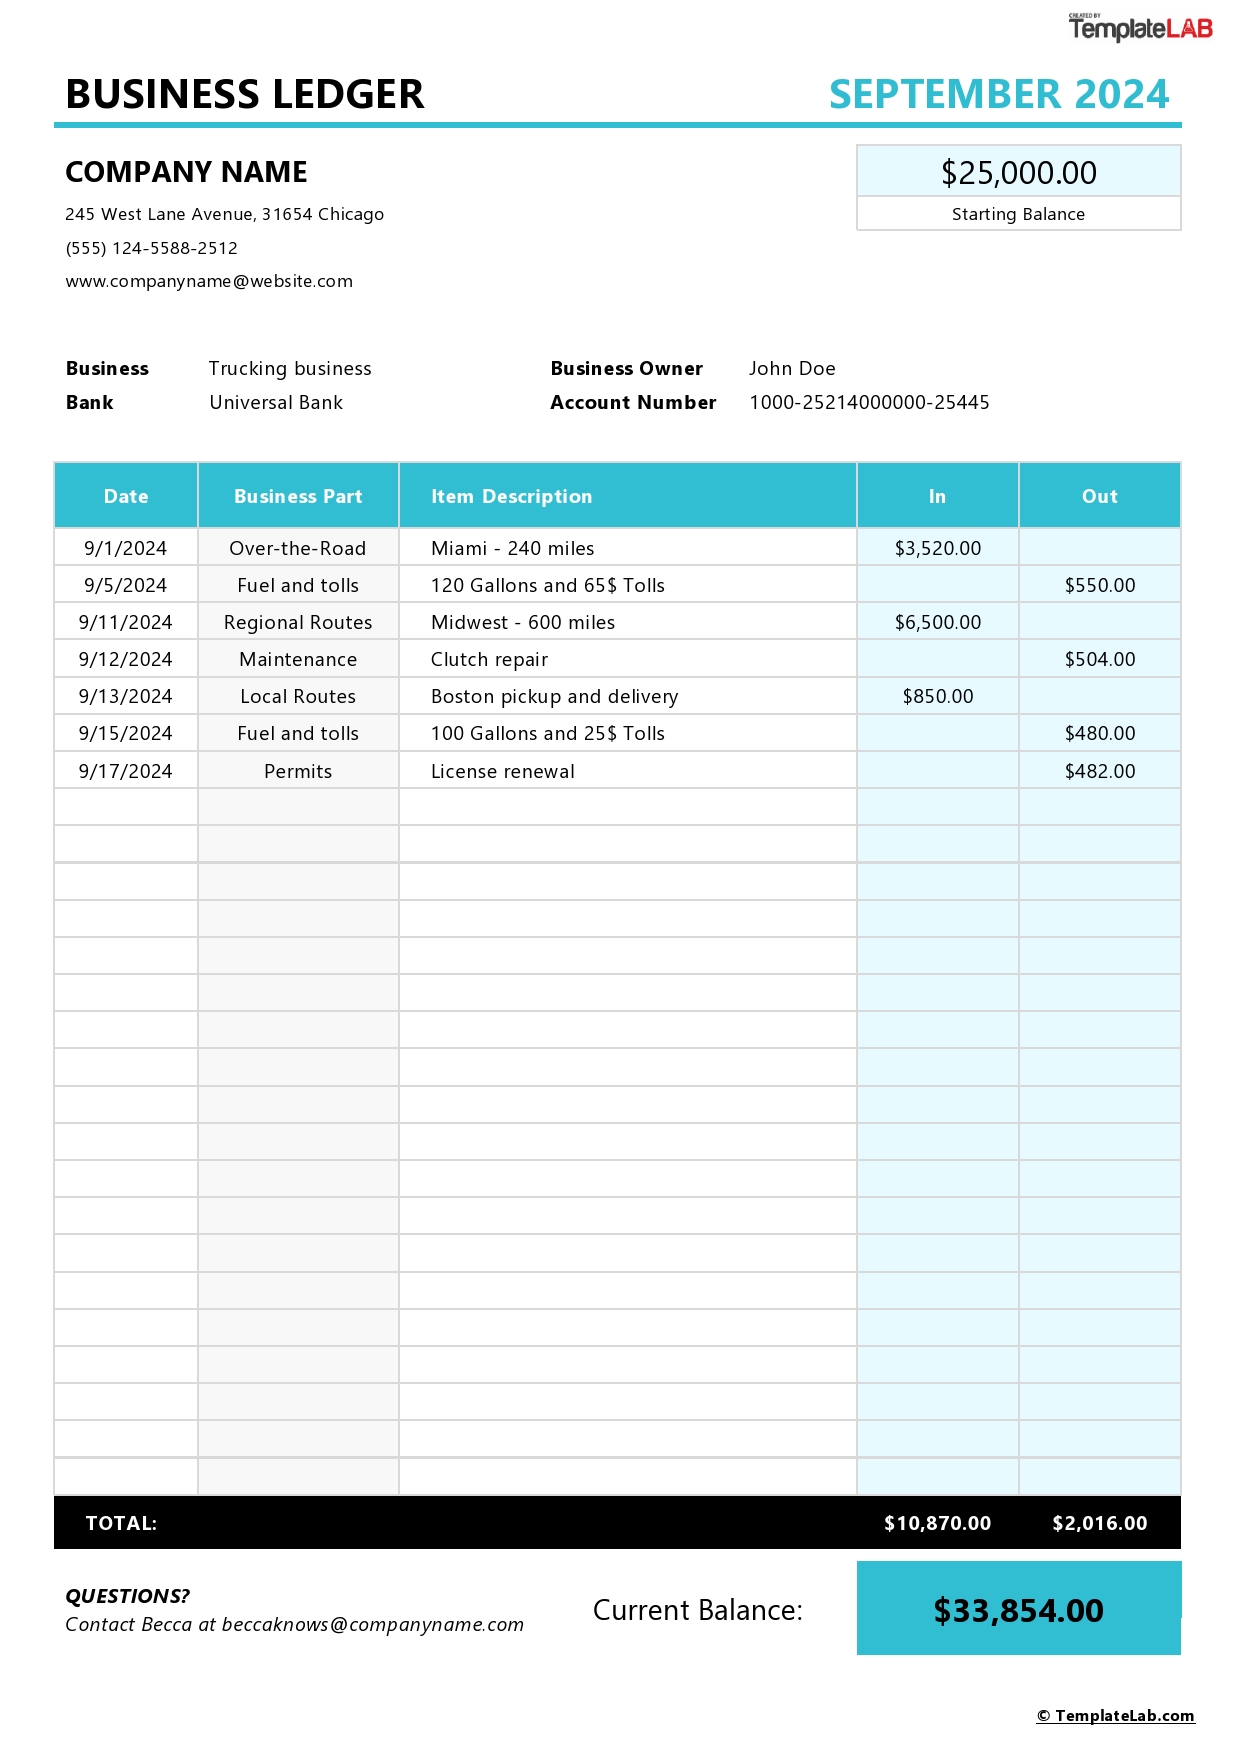 Free Business Ledger Template